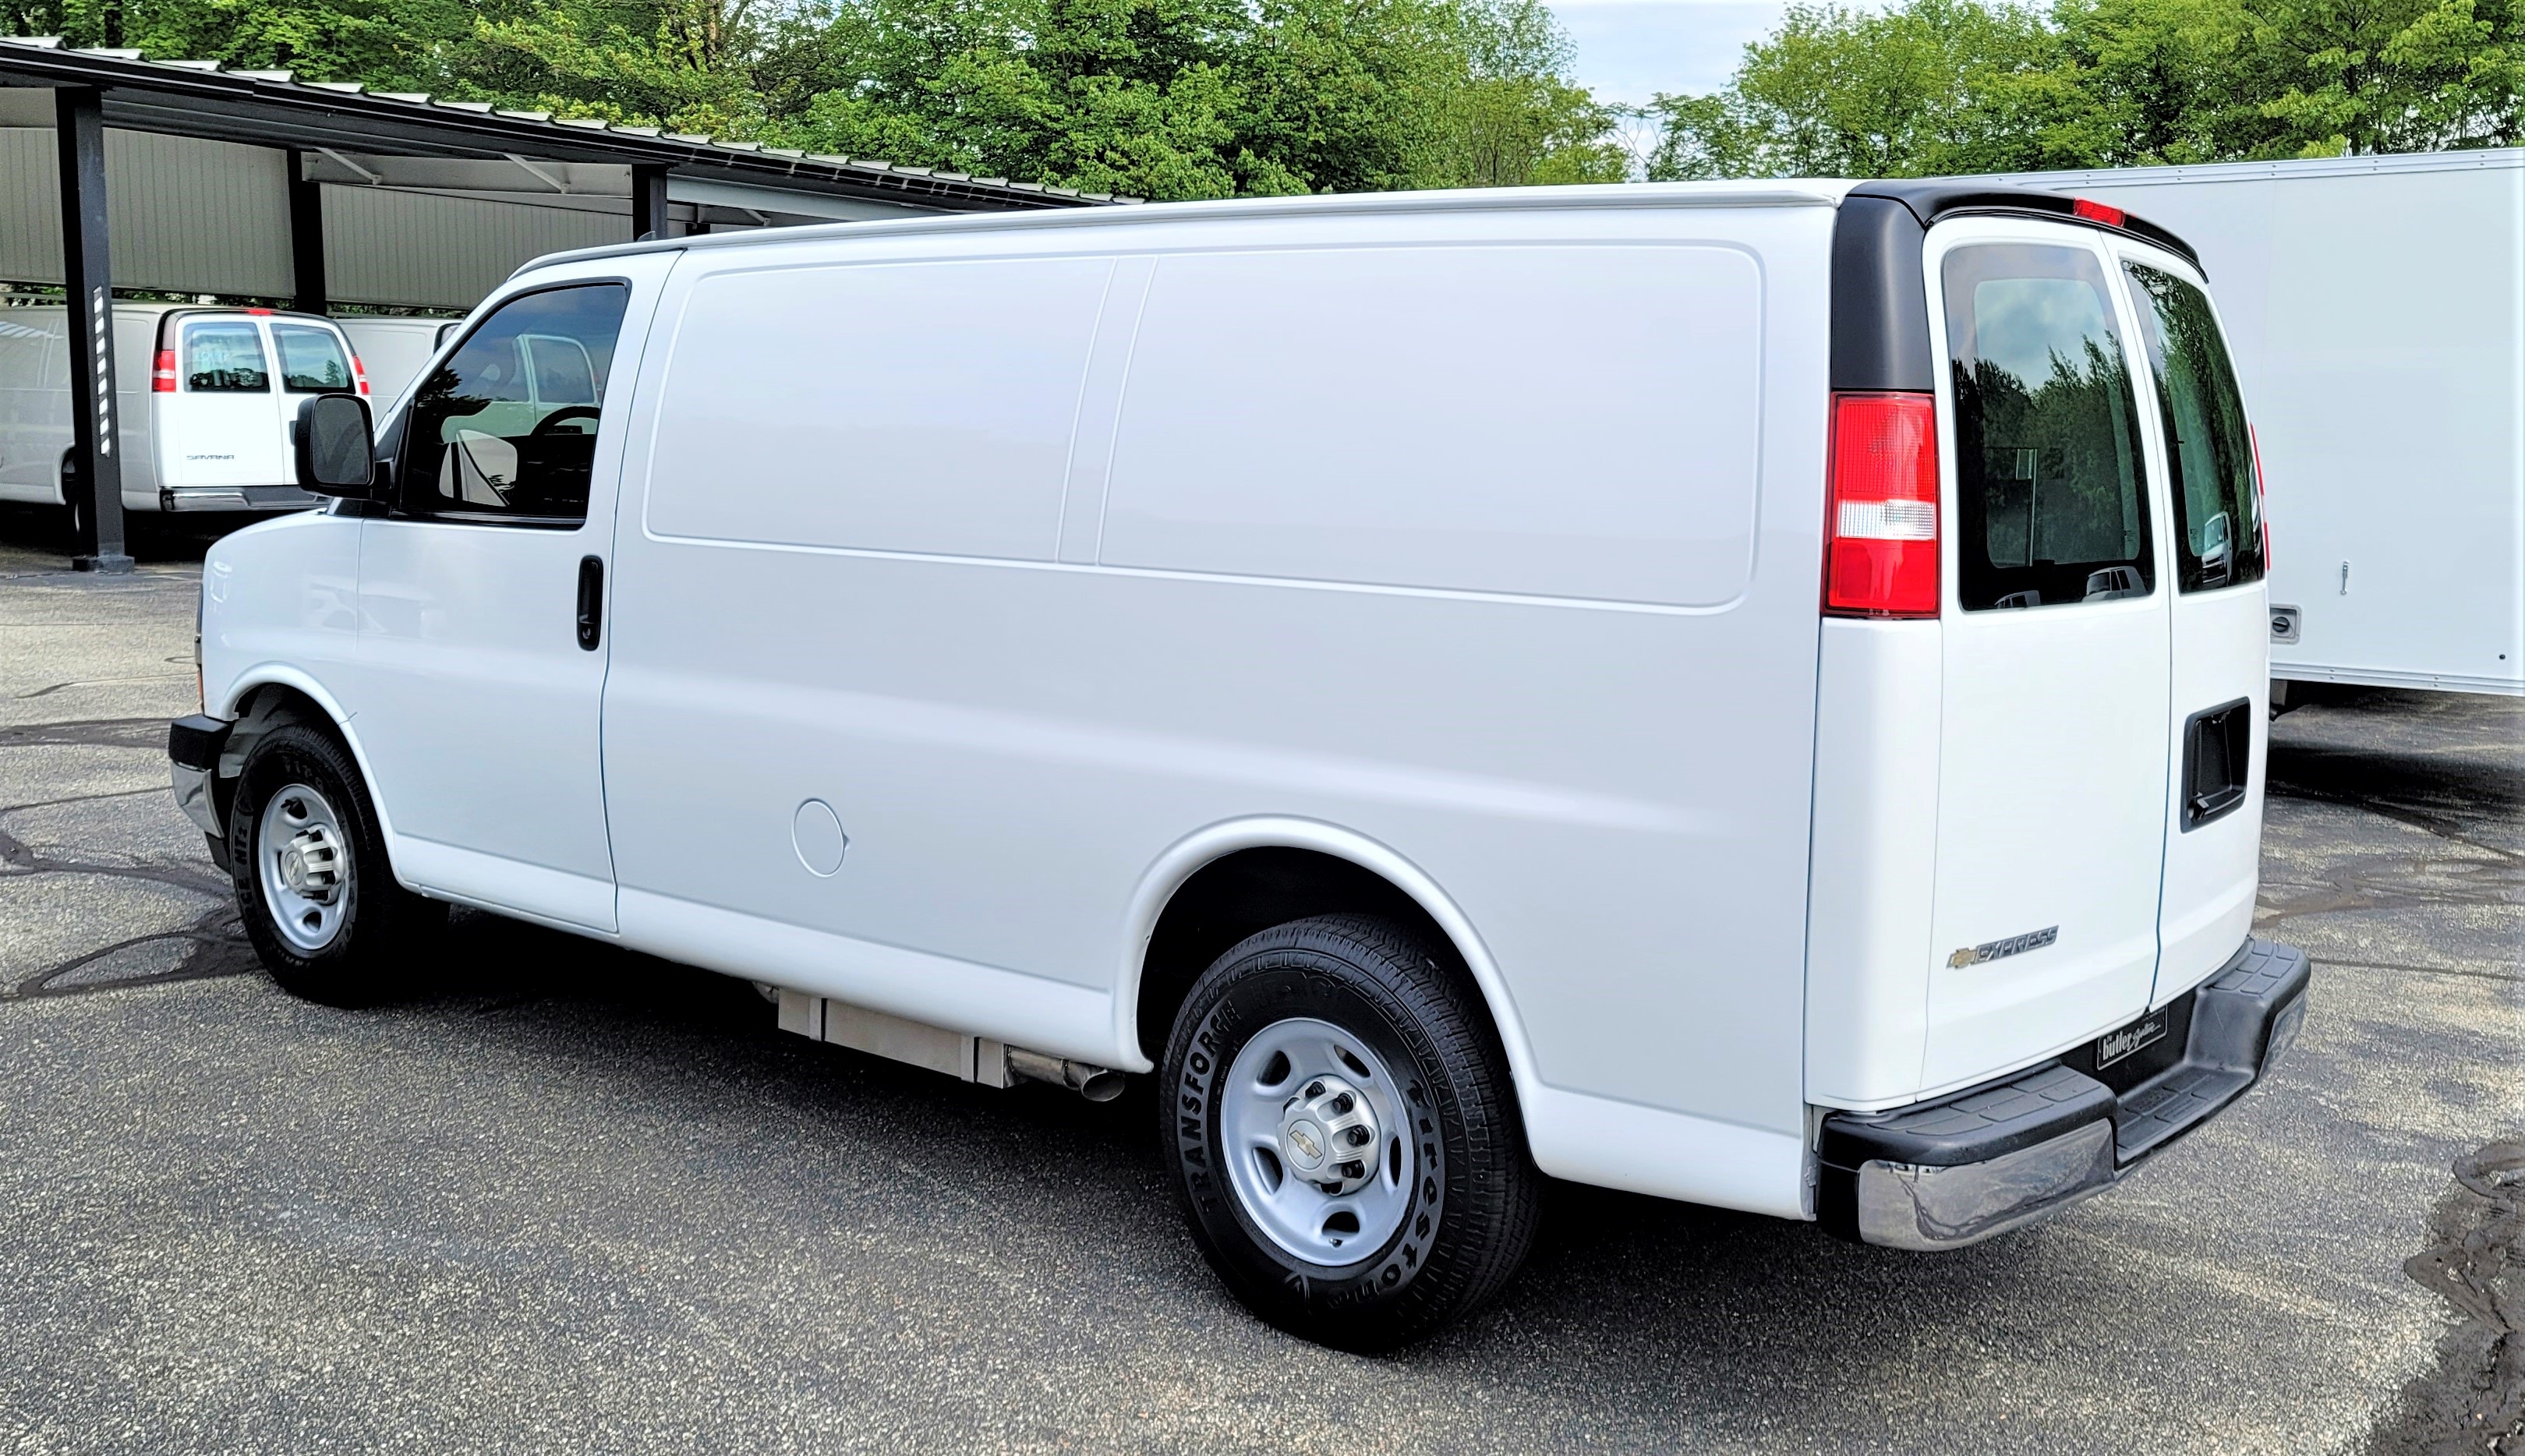 2020 Chevrolet Express, 2500 Series, 8600 GVW, Heavy Duty 3/4 Ton, Regular Length Van, With a " Reconditioned " Butler System Installed